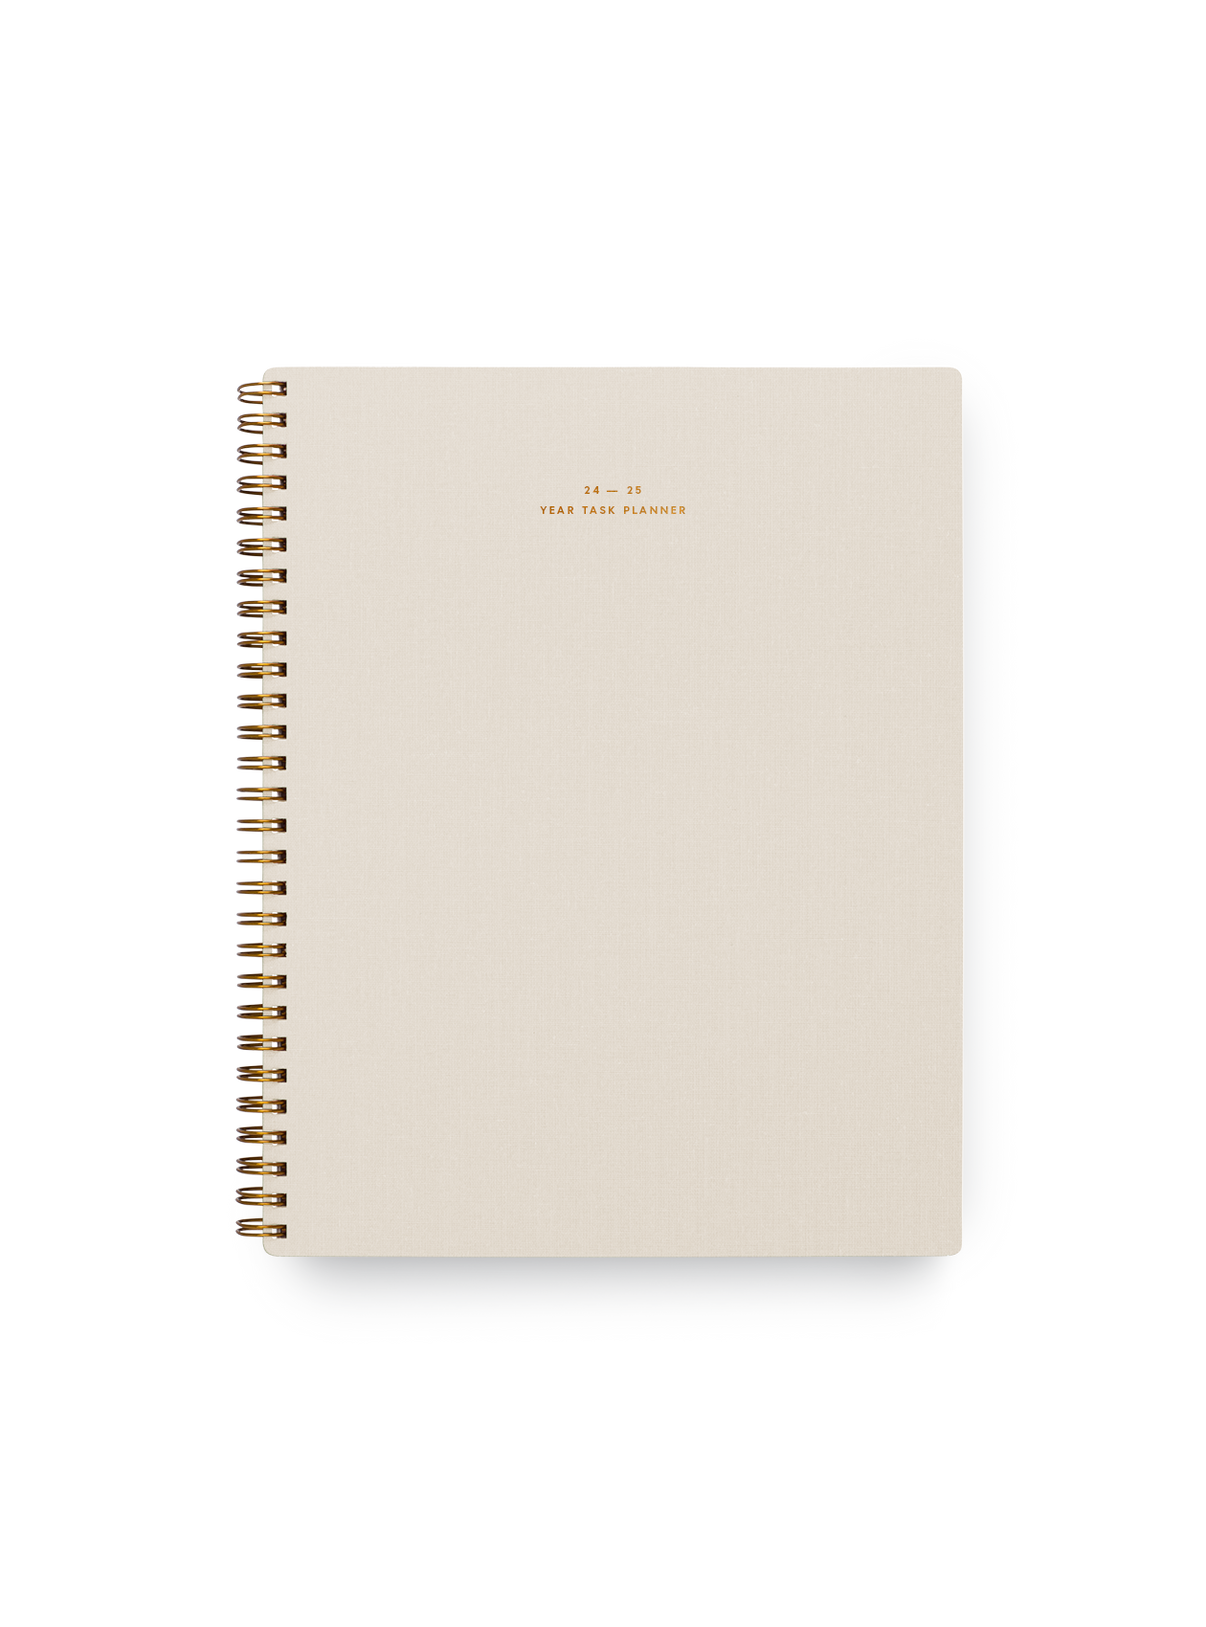 Appointed Year Task Planner with brass wire-o binding, foil stamped details, and durable water-resistant bookcloth || Natural Linen